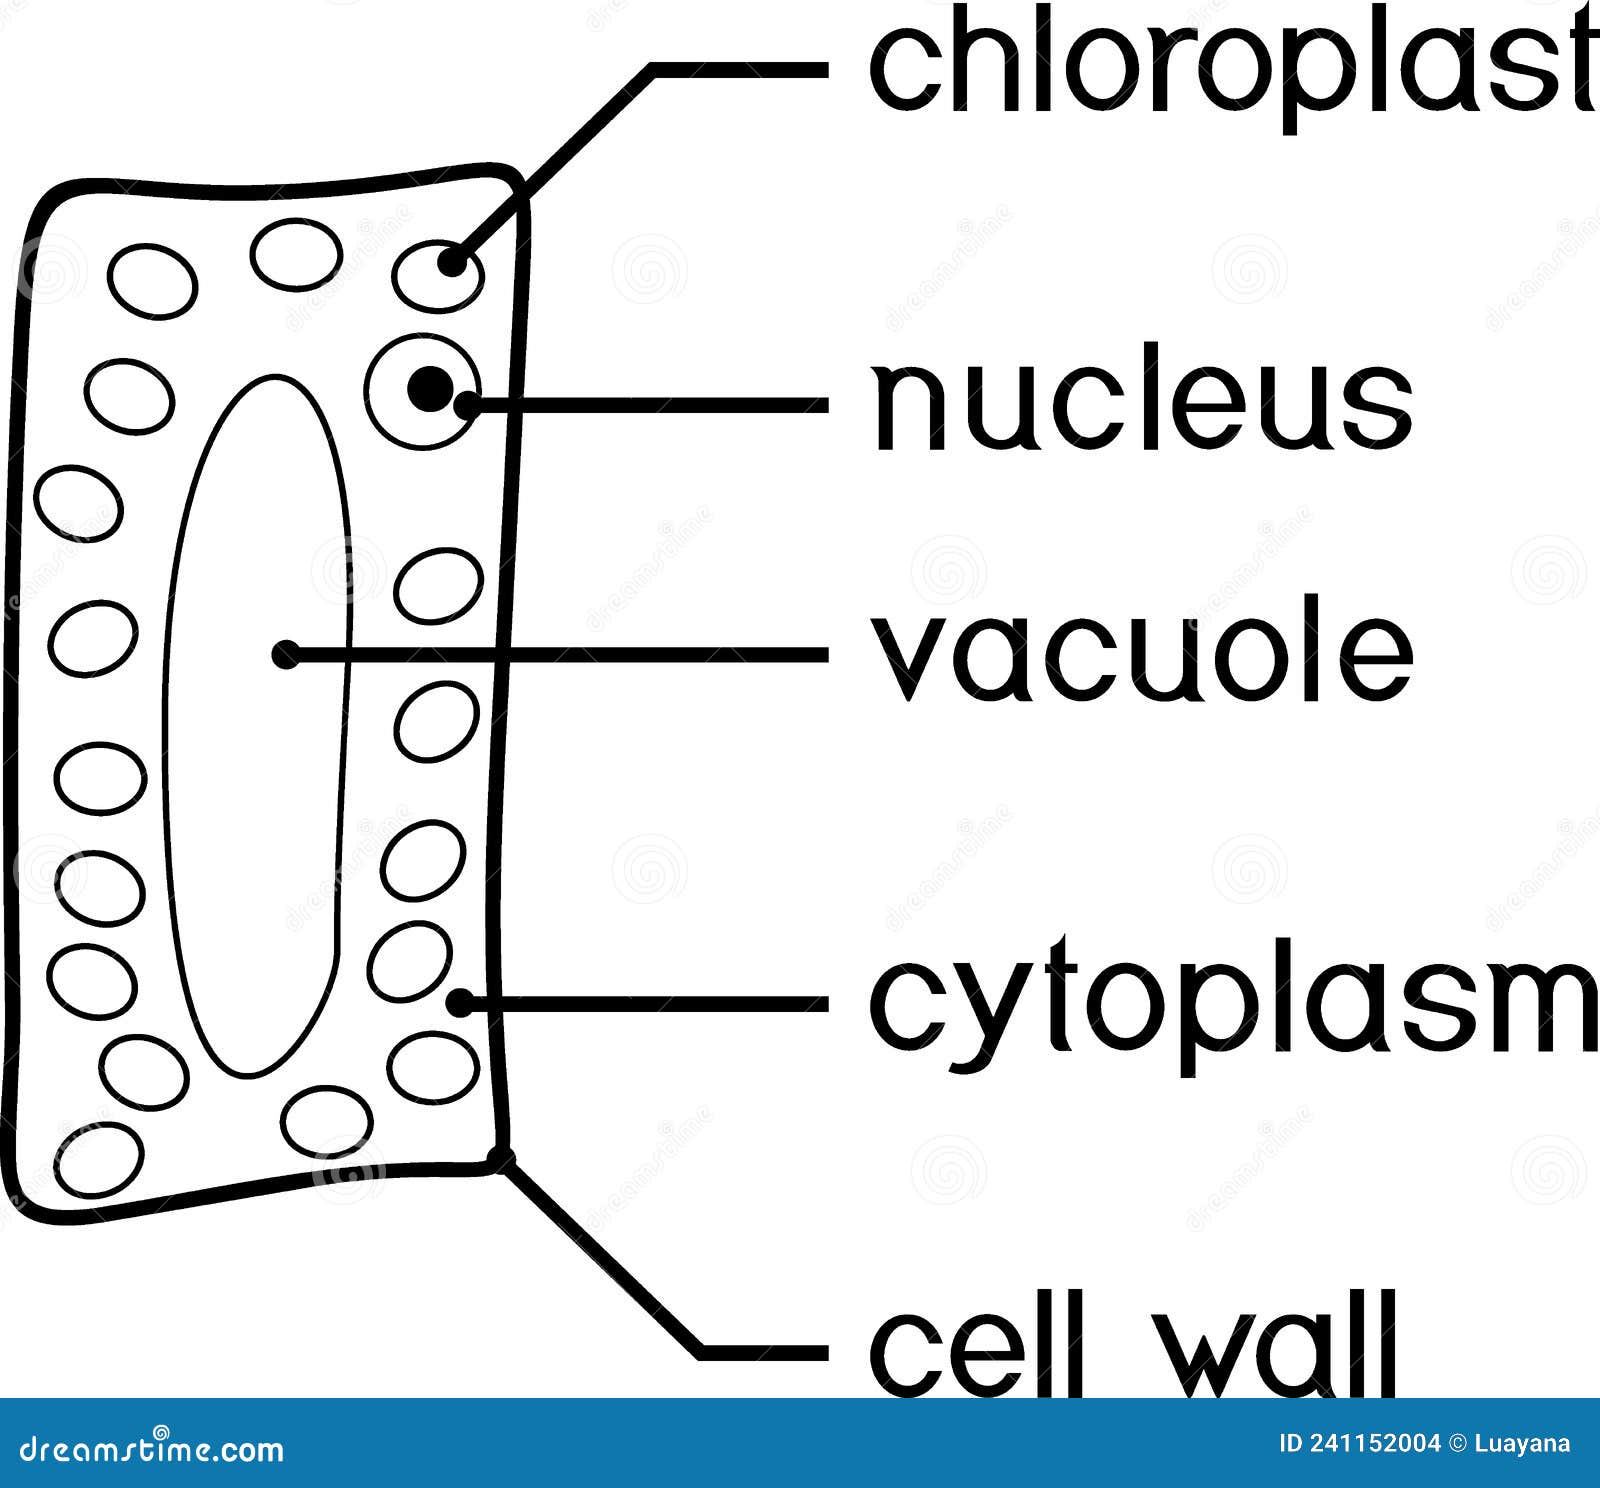 coloring page with simplified structure of plant cell chloroplast, nucleus, vacuole, cytoplasm and cell wall.